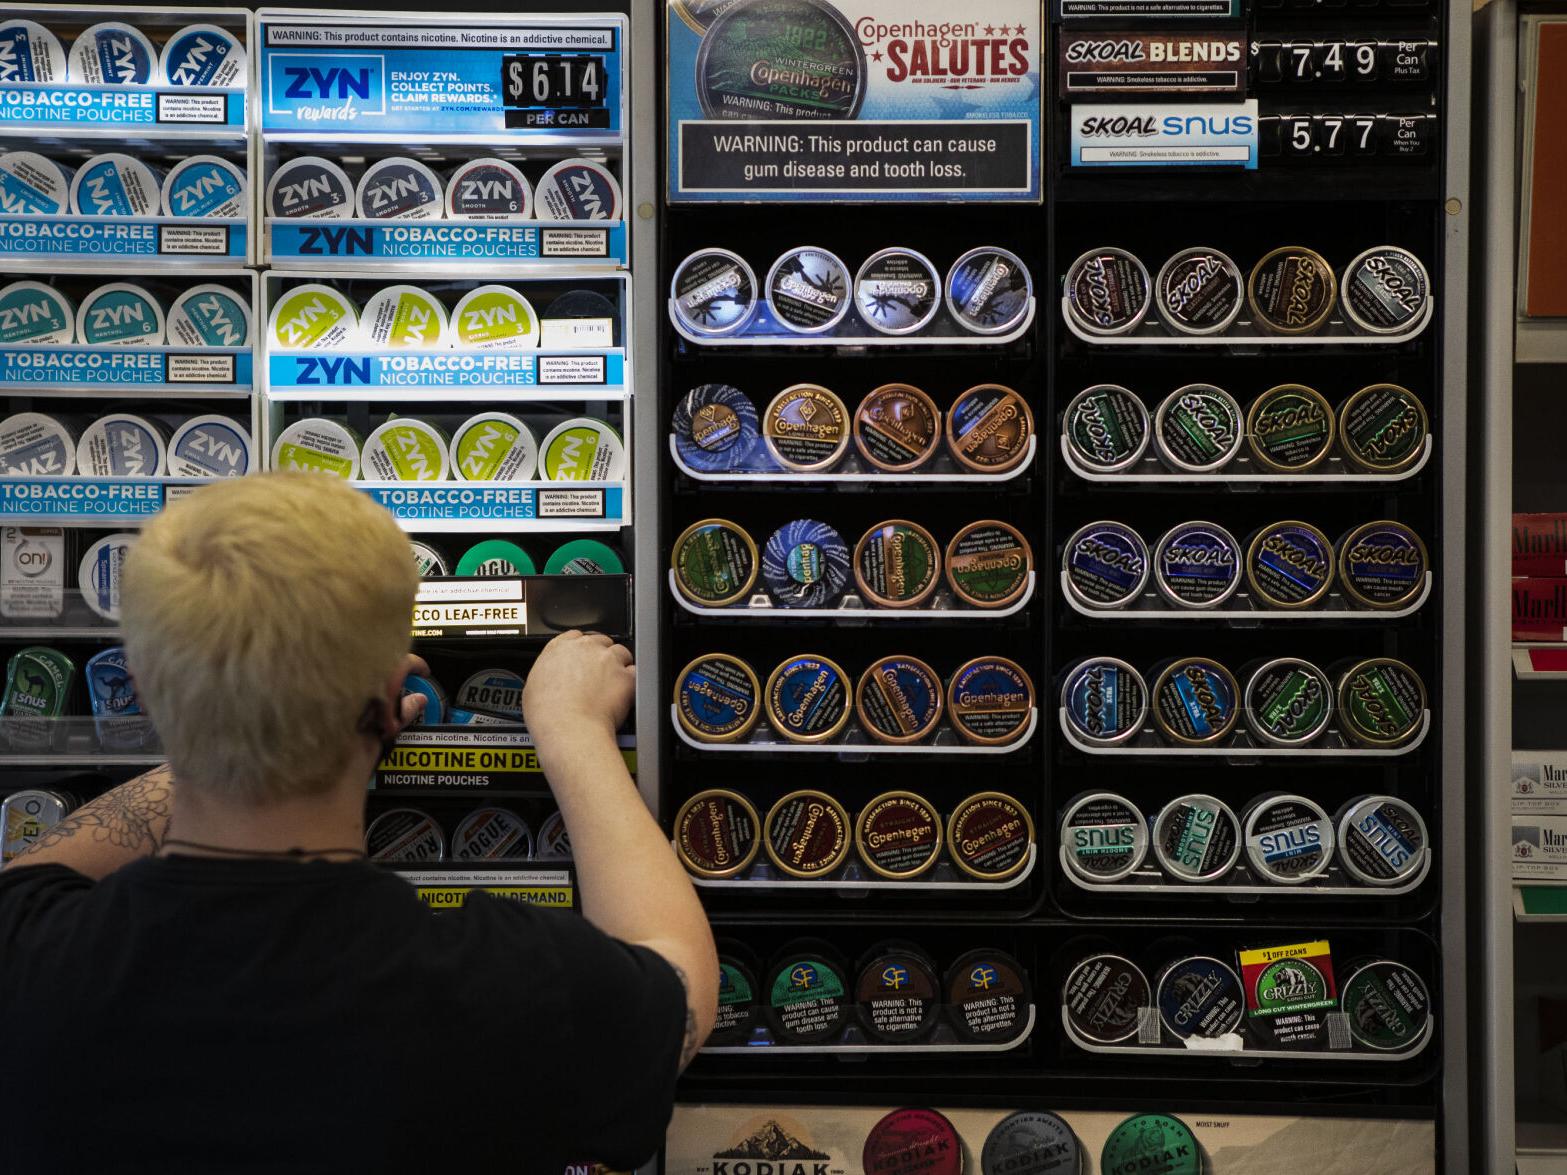 Dyrke motion Ydmyge ting It's like having an execution date': Retailers fear closing amid Denver's  flavored tobacco ban | Business | denvergazette.com